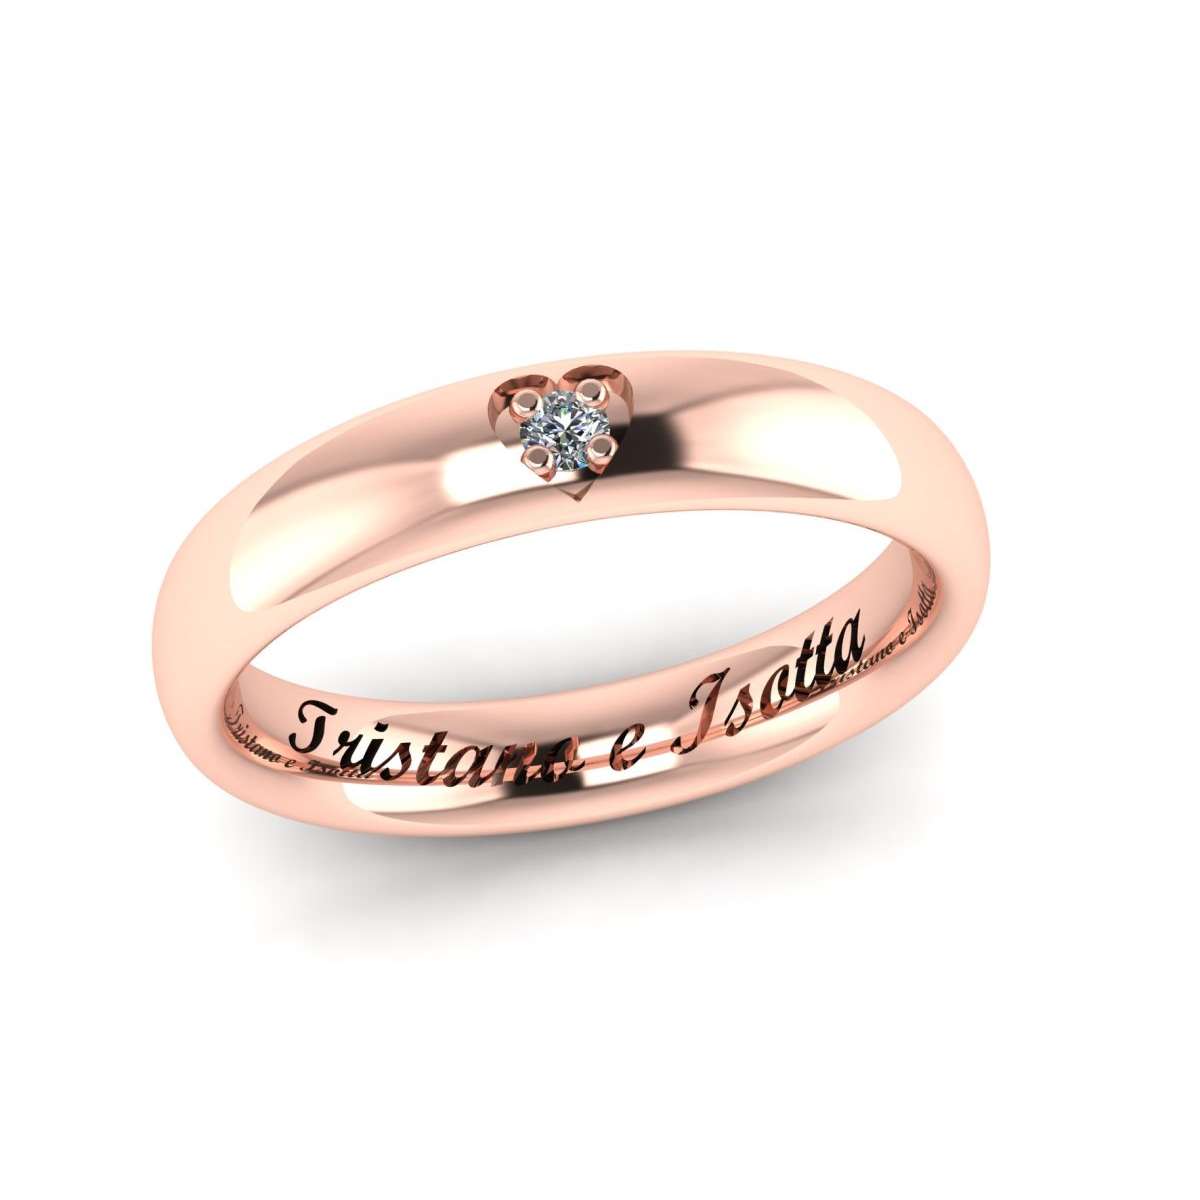 Pink gold comfort fit handcrafted wedding ring Tristan and Isolde heart shape decoration 0.03 carats diamonds G-VVS1